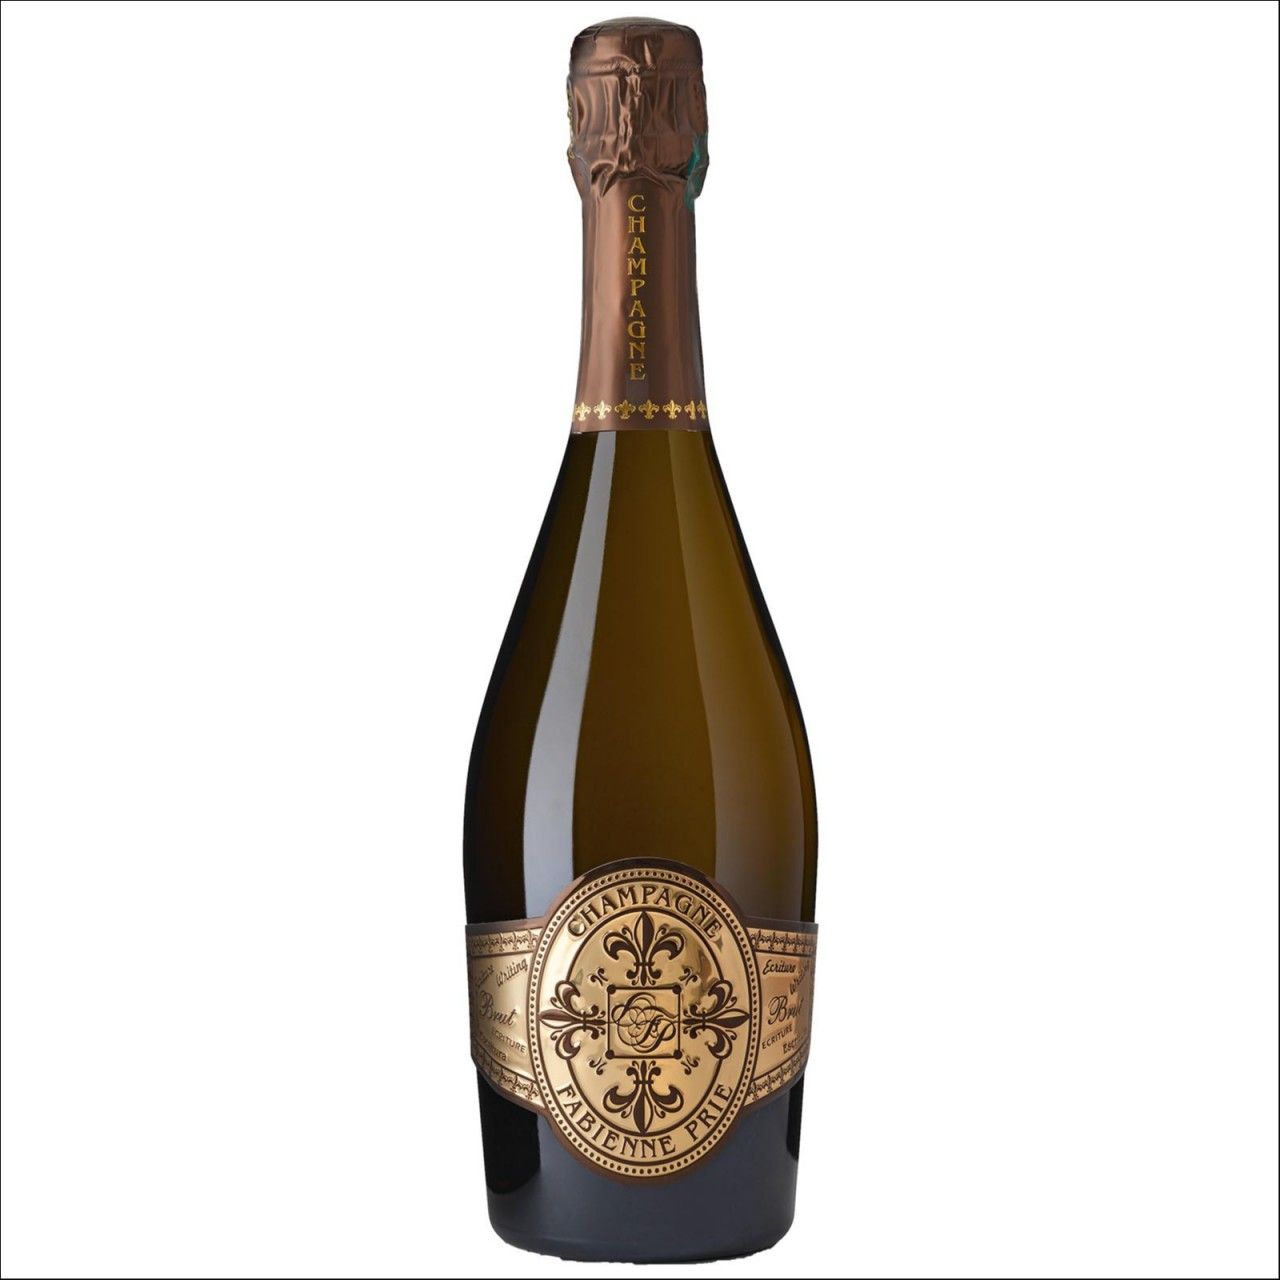 CHRYSOBULLE BY PRIE - CHAMPAGNE - Cuvée Ecriture- Champagne Prié 